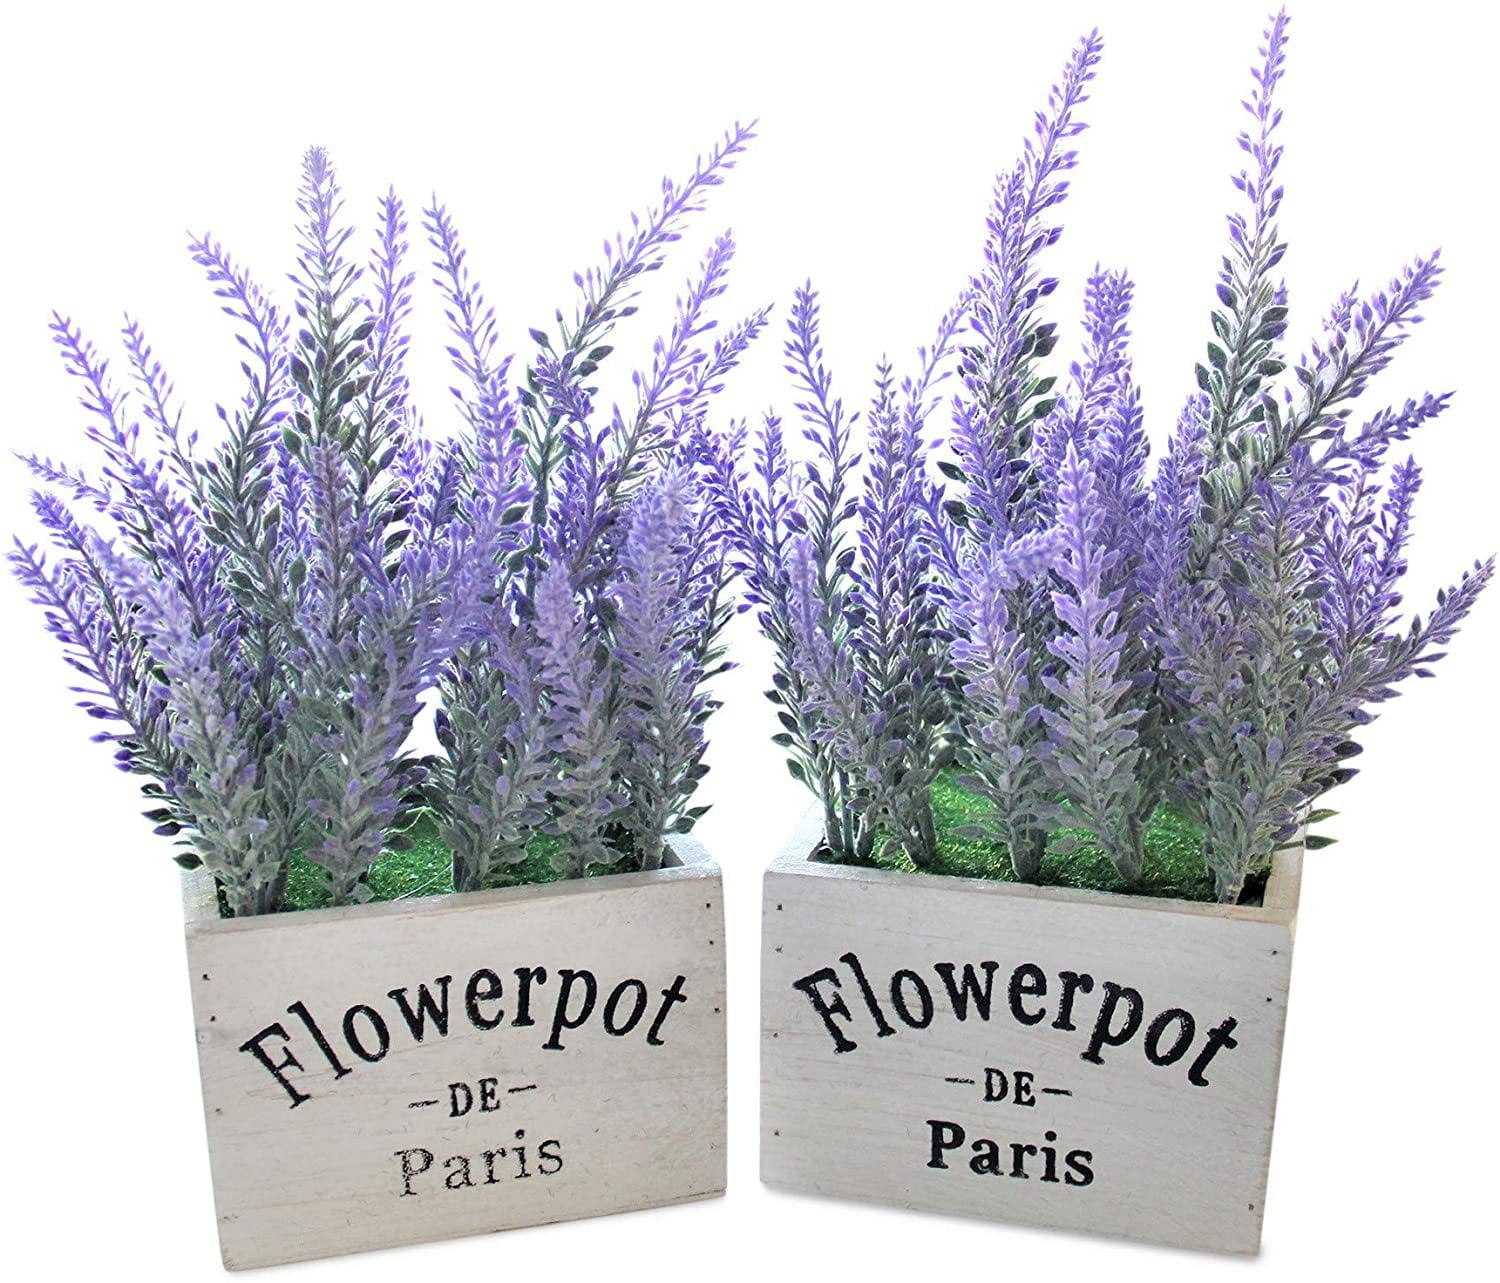 2 New 12in Potted White Lavender Bushes Artificial Silk Flowers Plants OFFER! 